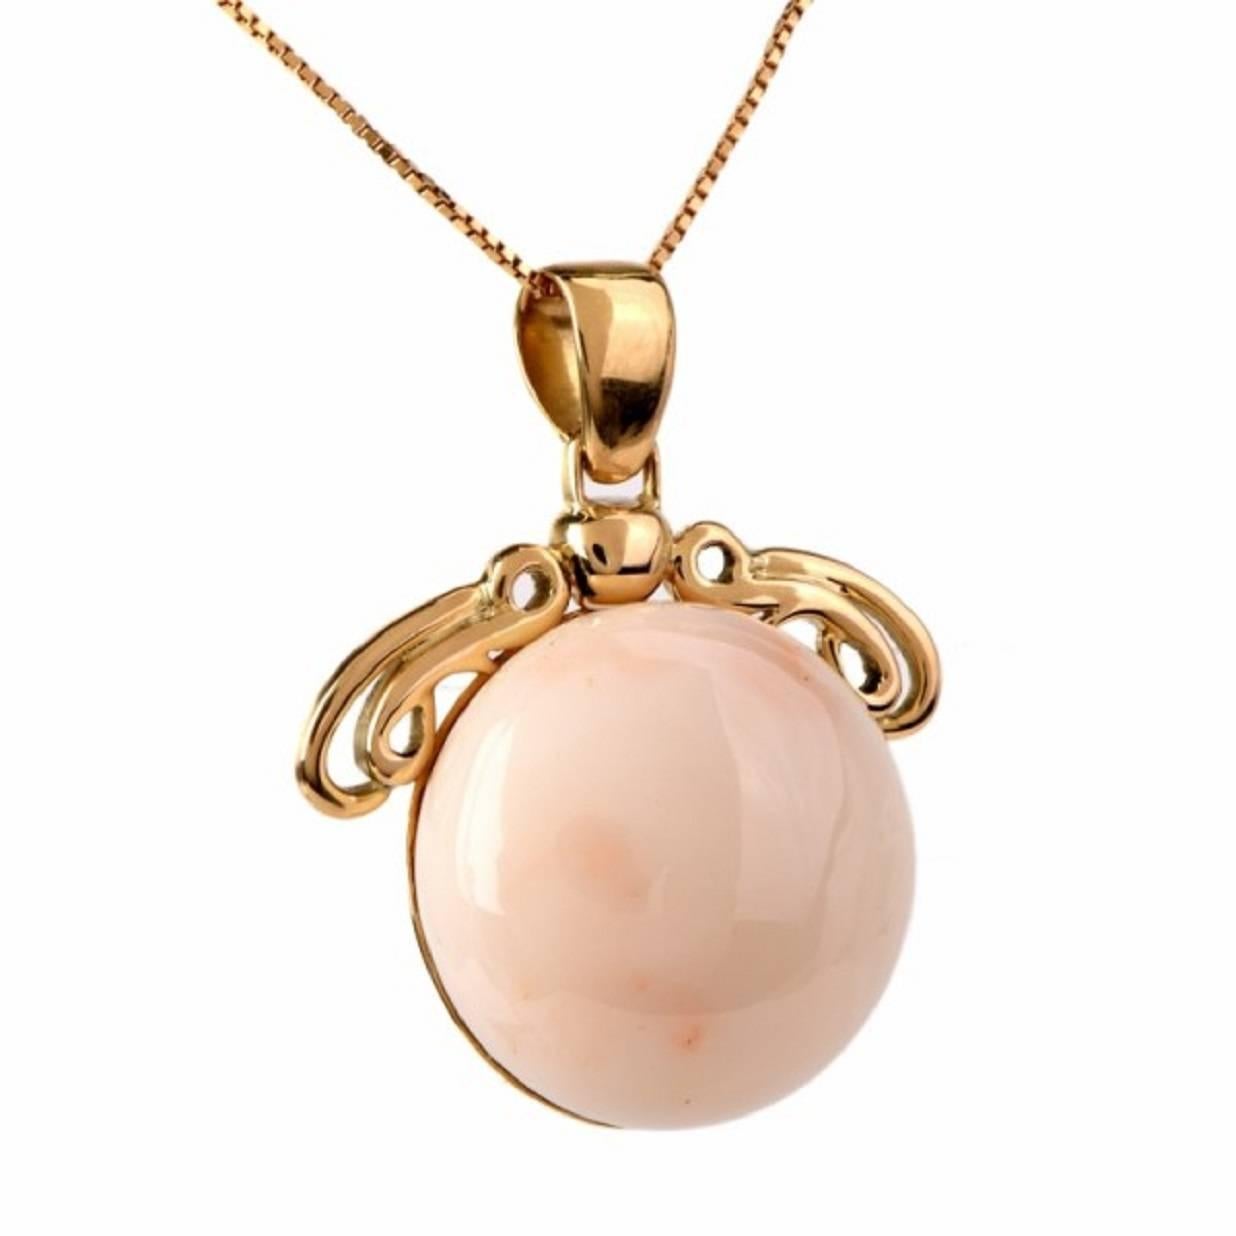 This  vintage  coral  pendant  is handcrafted in 18K yellow gold, weighs 20.3  grams  and measures 40  mm long (inclusive of bale) and 33  mm wide. This classically enchanting  vintage pendant incorporates  a natural pastel  soft  creamy-white